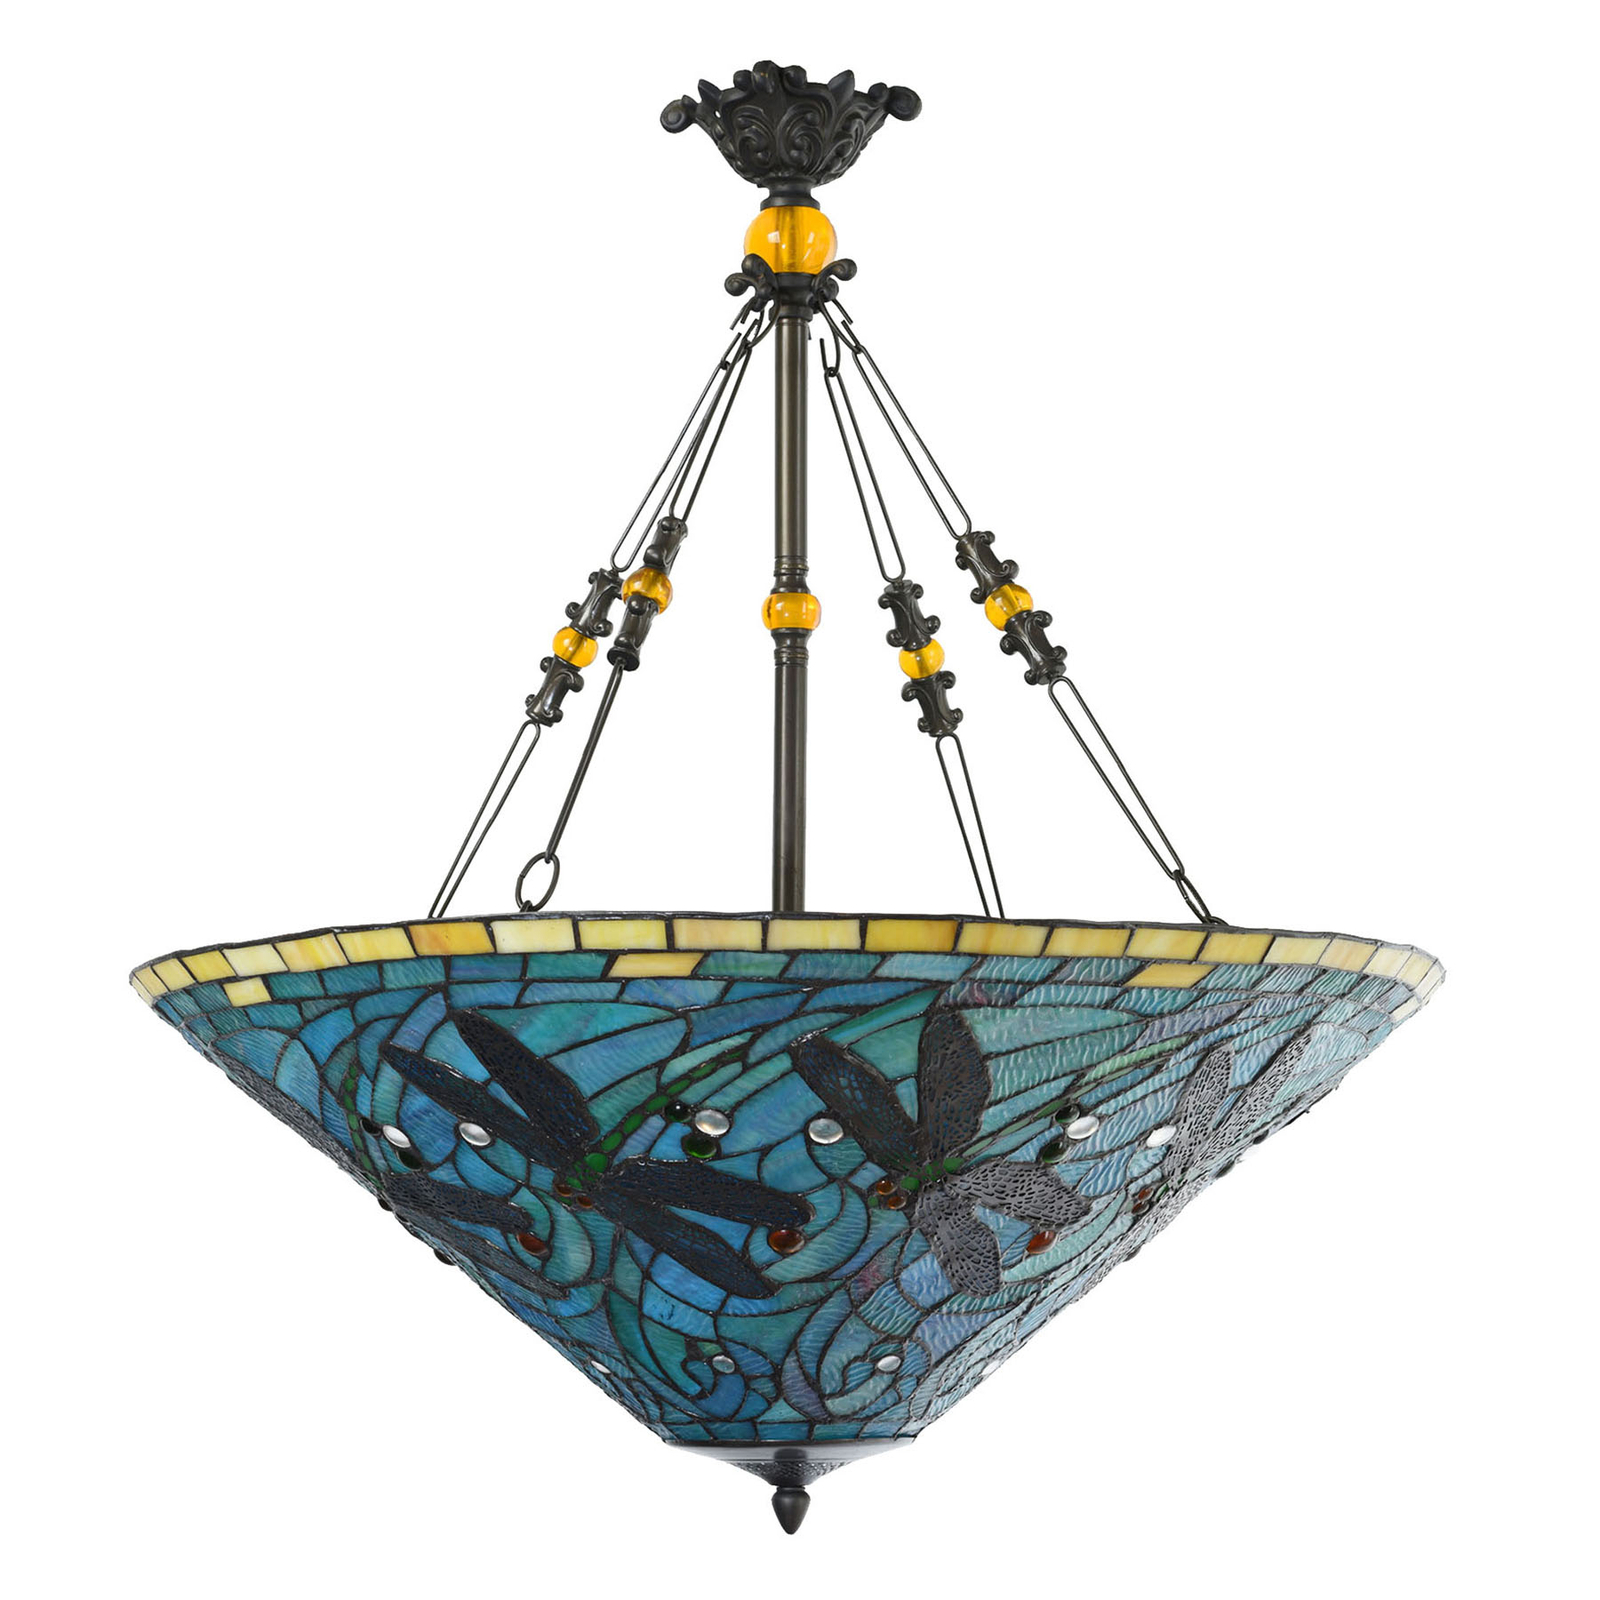 5975 hanging light with a colourful Tiffany design